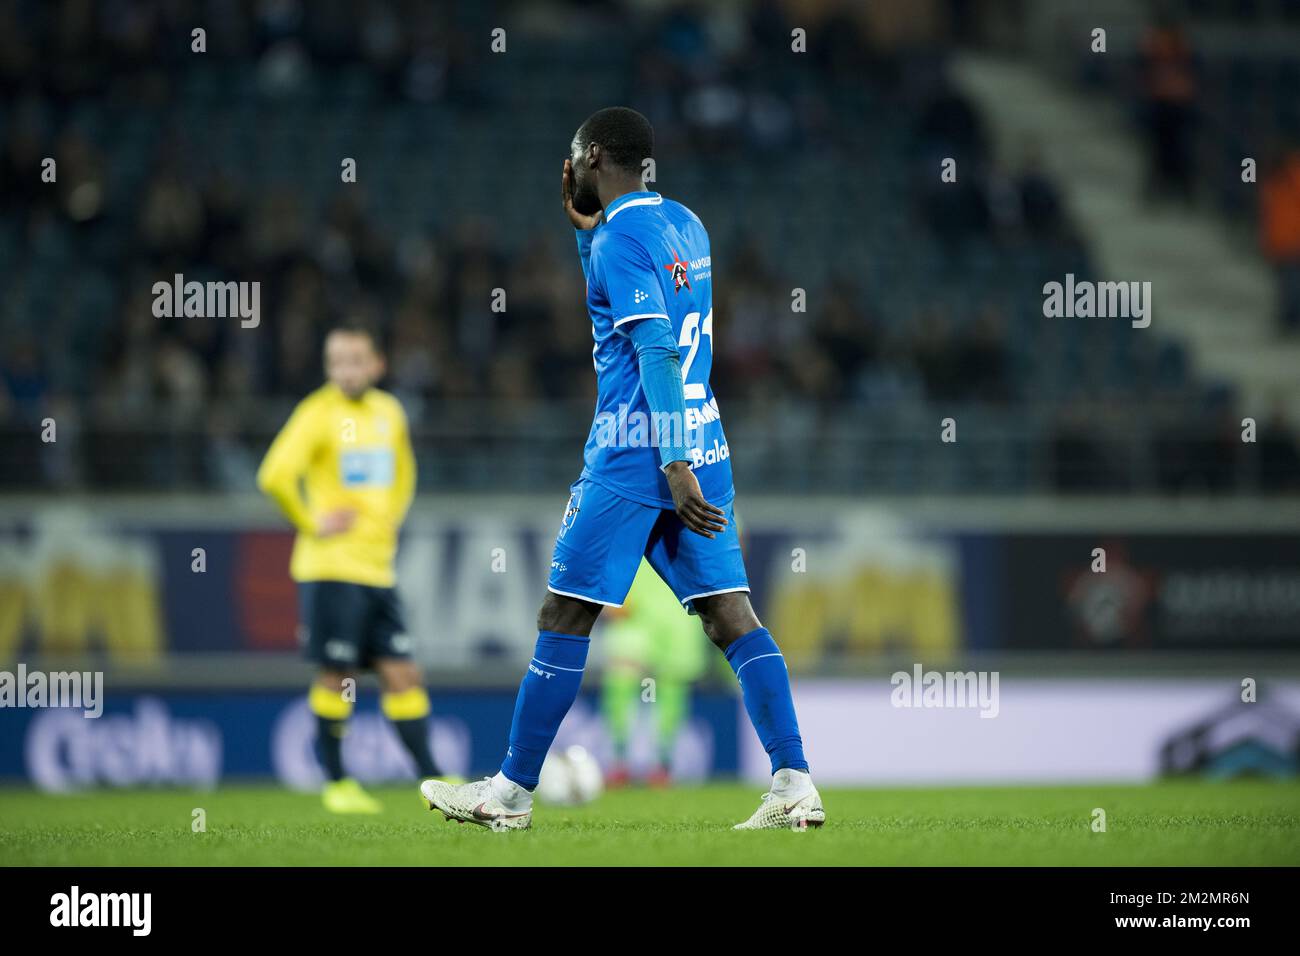 Gent's Nana Asare pictured during a soccer game between JPL KAA Gent and PL FCO Beerschot-Wilrijk, Tuesday 04 December 2018 in Gent, in the 1/8th final of the 'Croky Cup' Belgian cup. BELGA PHOTO JASPER JACOBS Stock Photo